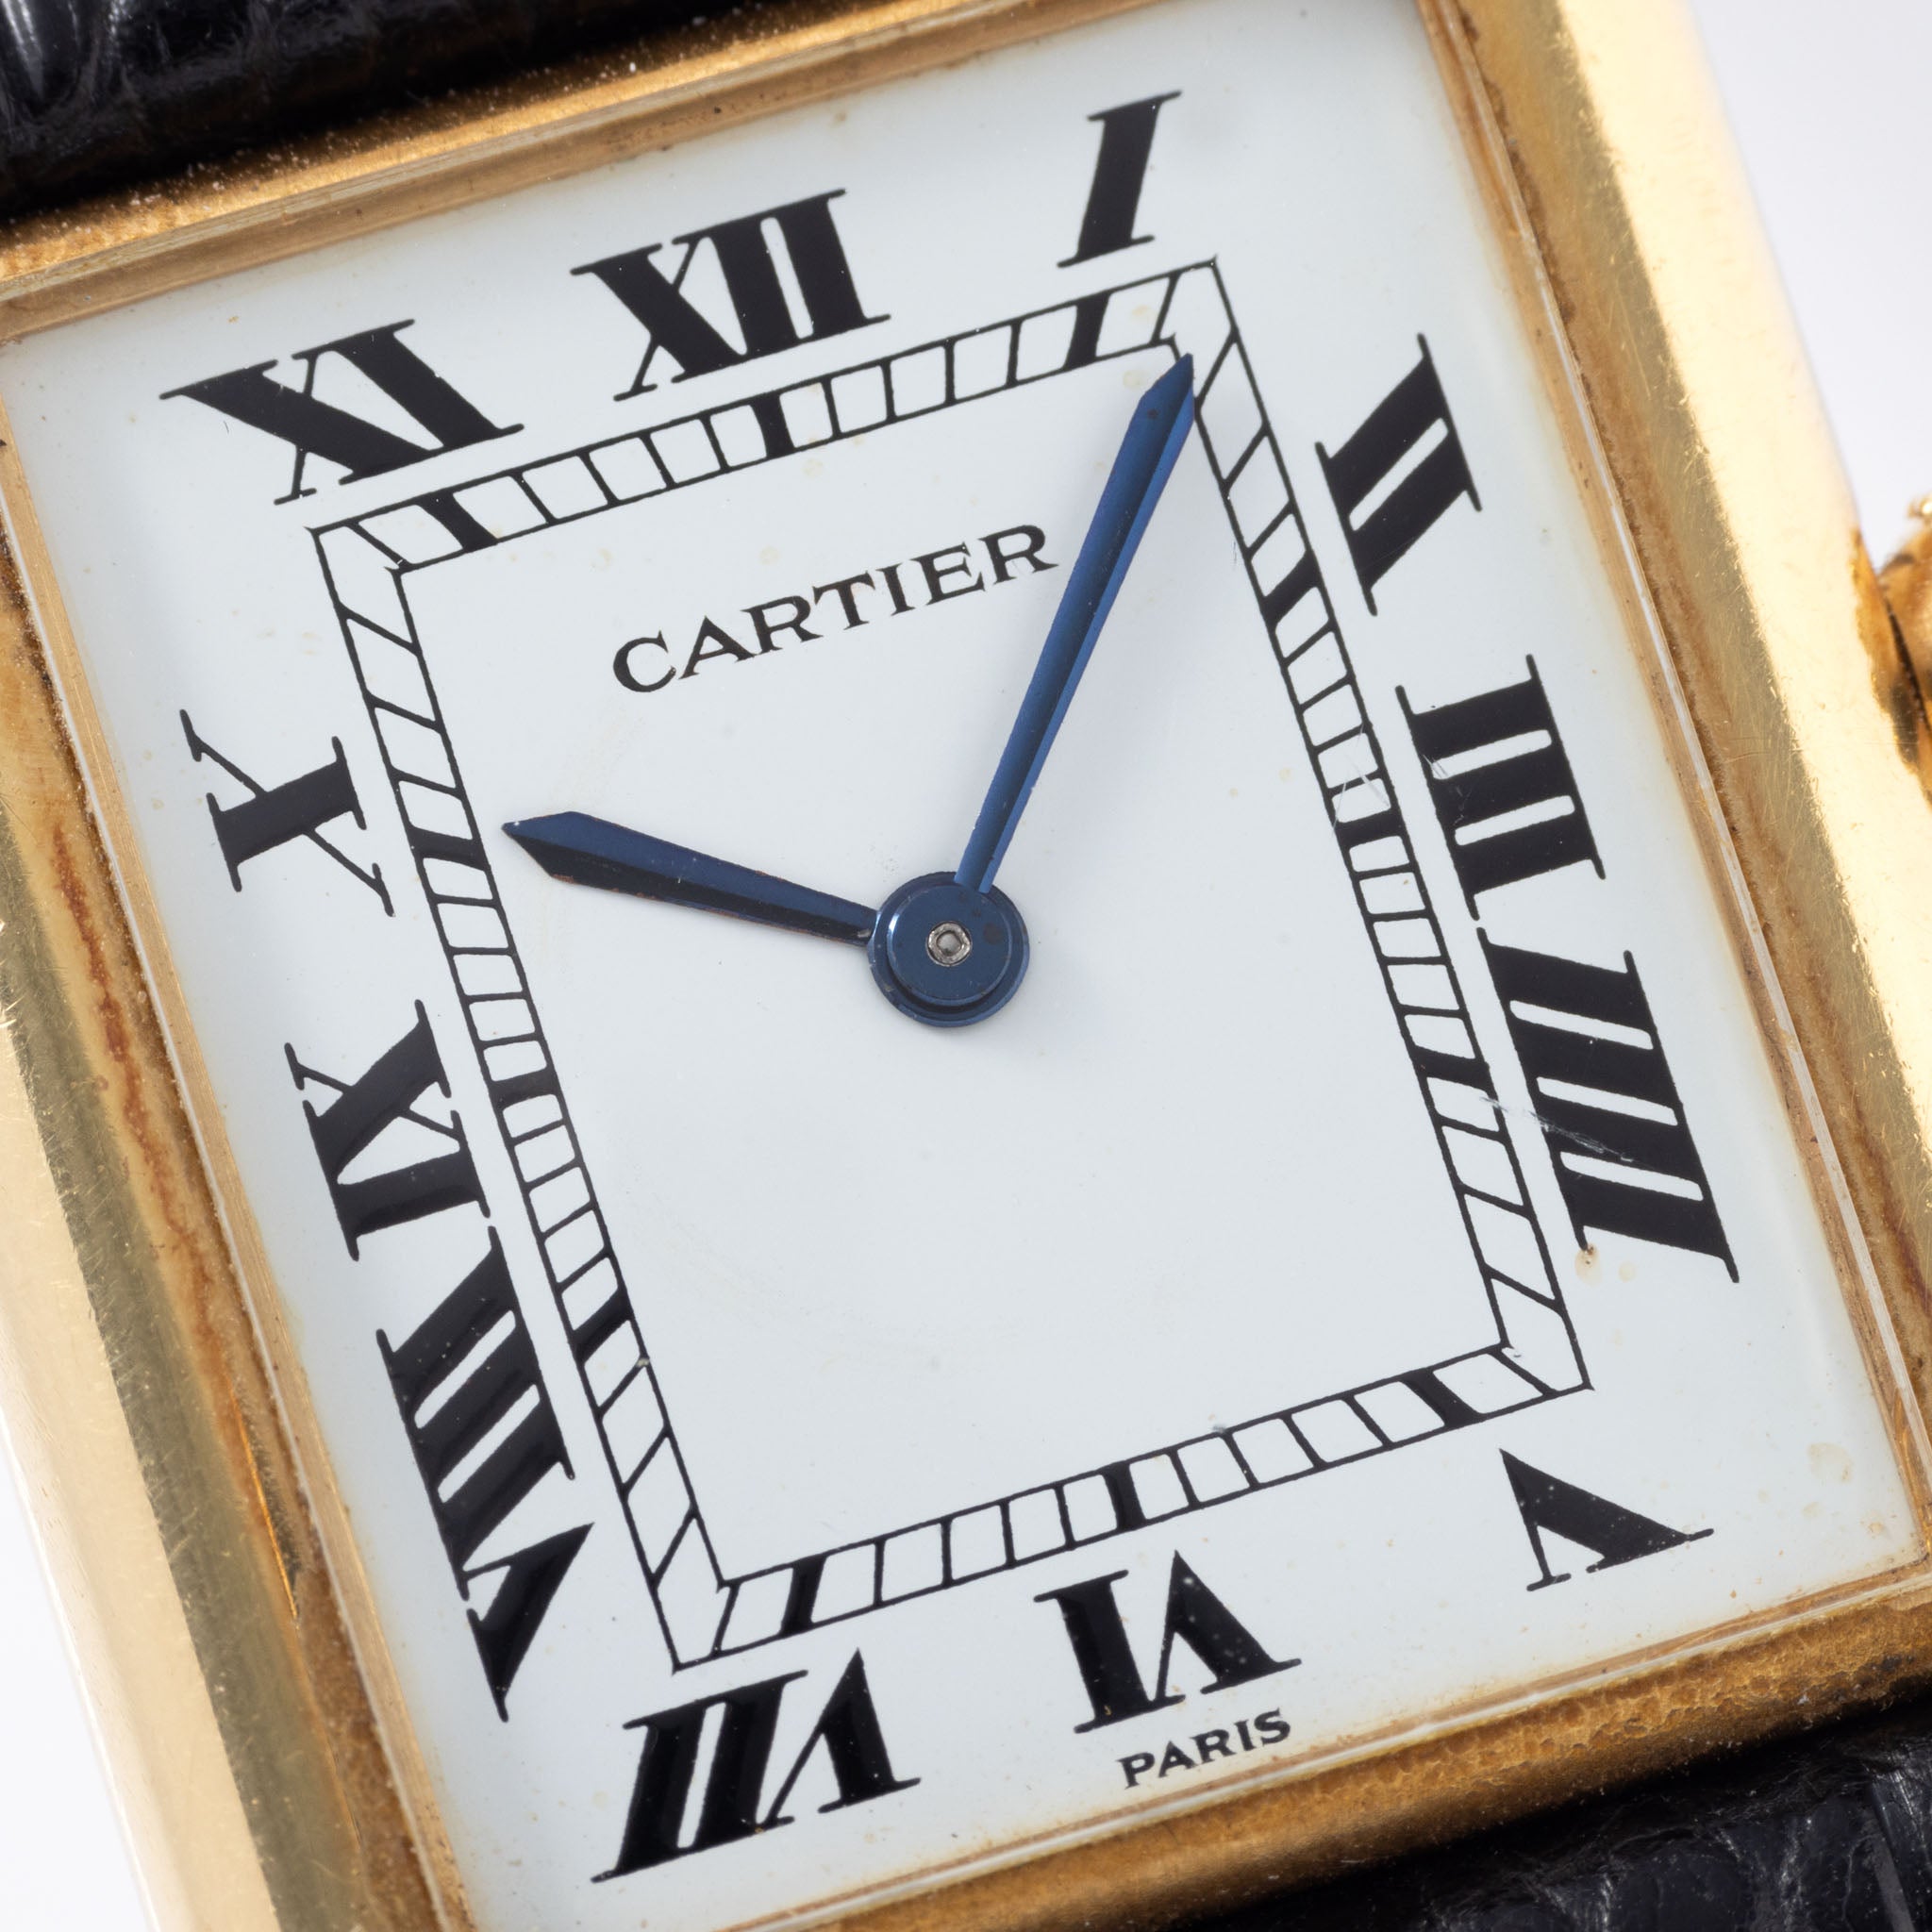 Cartier Paris Tank Louis 18kt Yellow Gold ‘Extra Plate’ early 70s